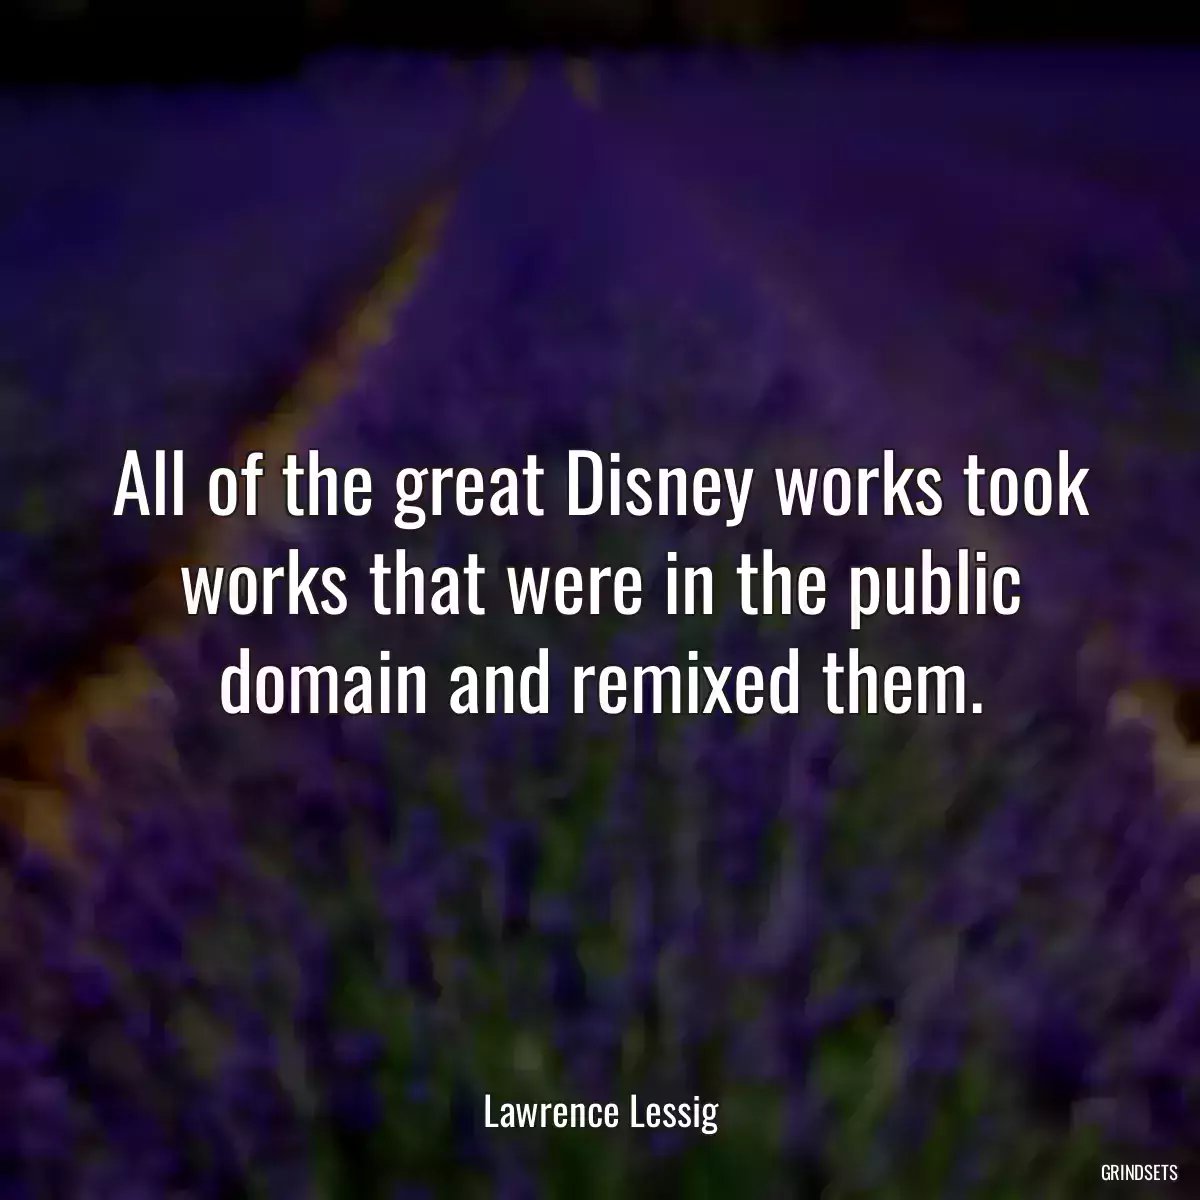 All of the great Disney works took works that were in the public domain and remixed them.